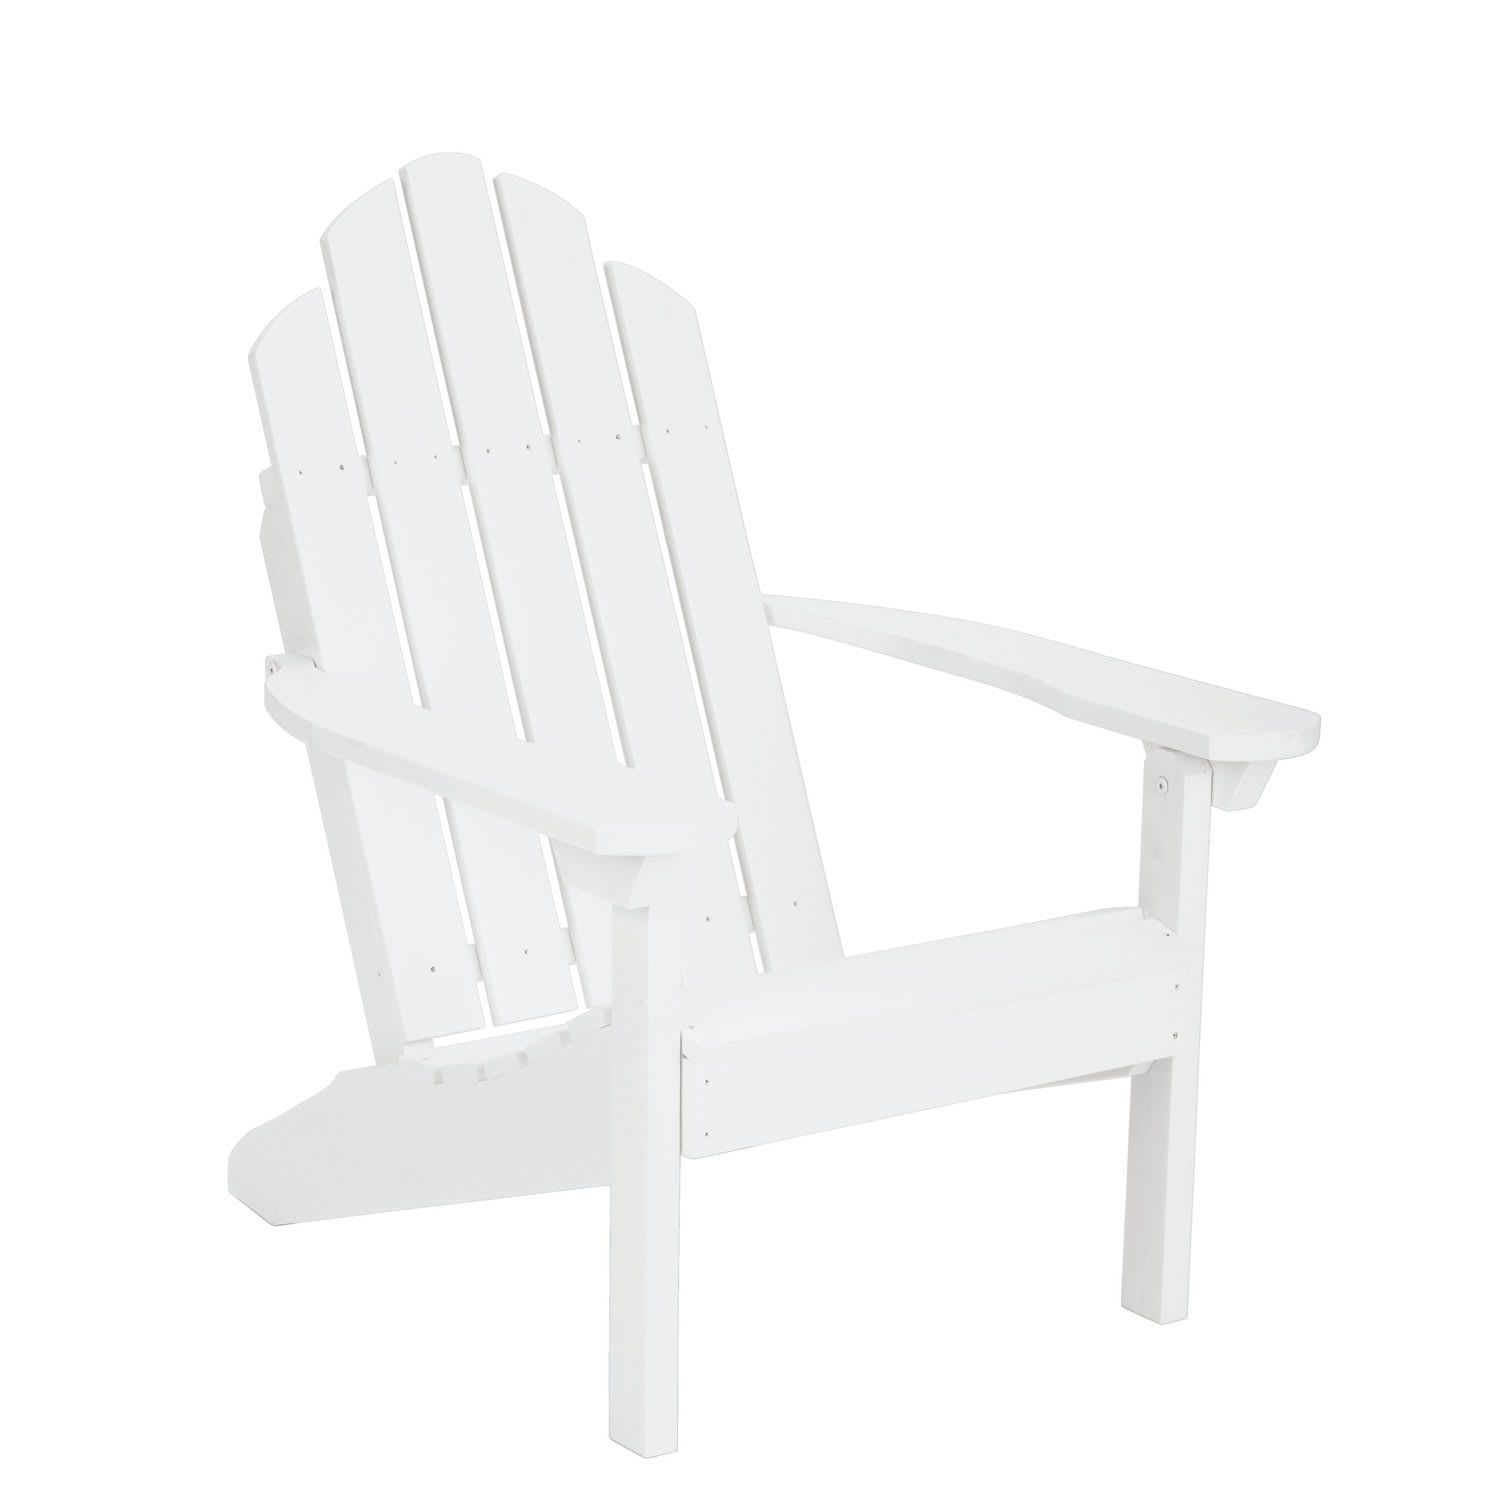 Adirondack Chair - White, One Size | The Company Store | The Company Store